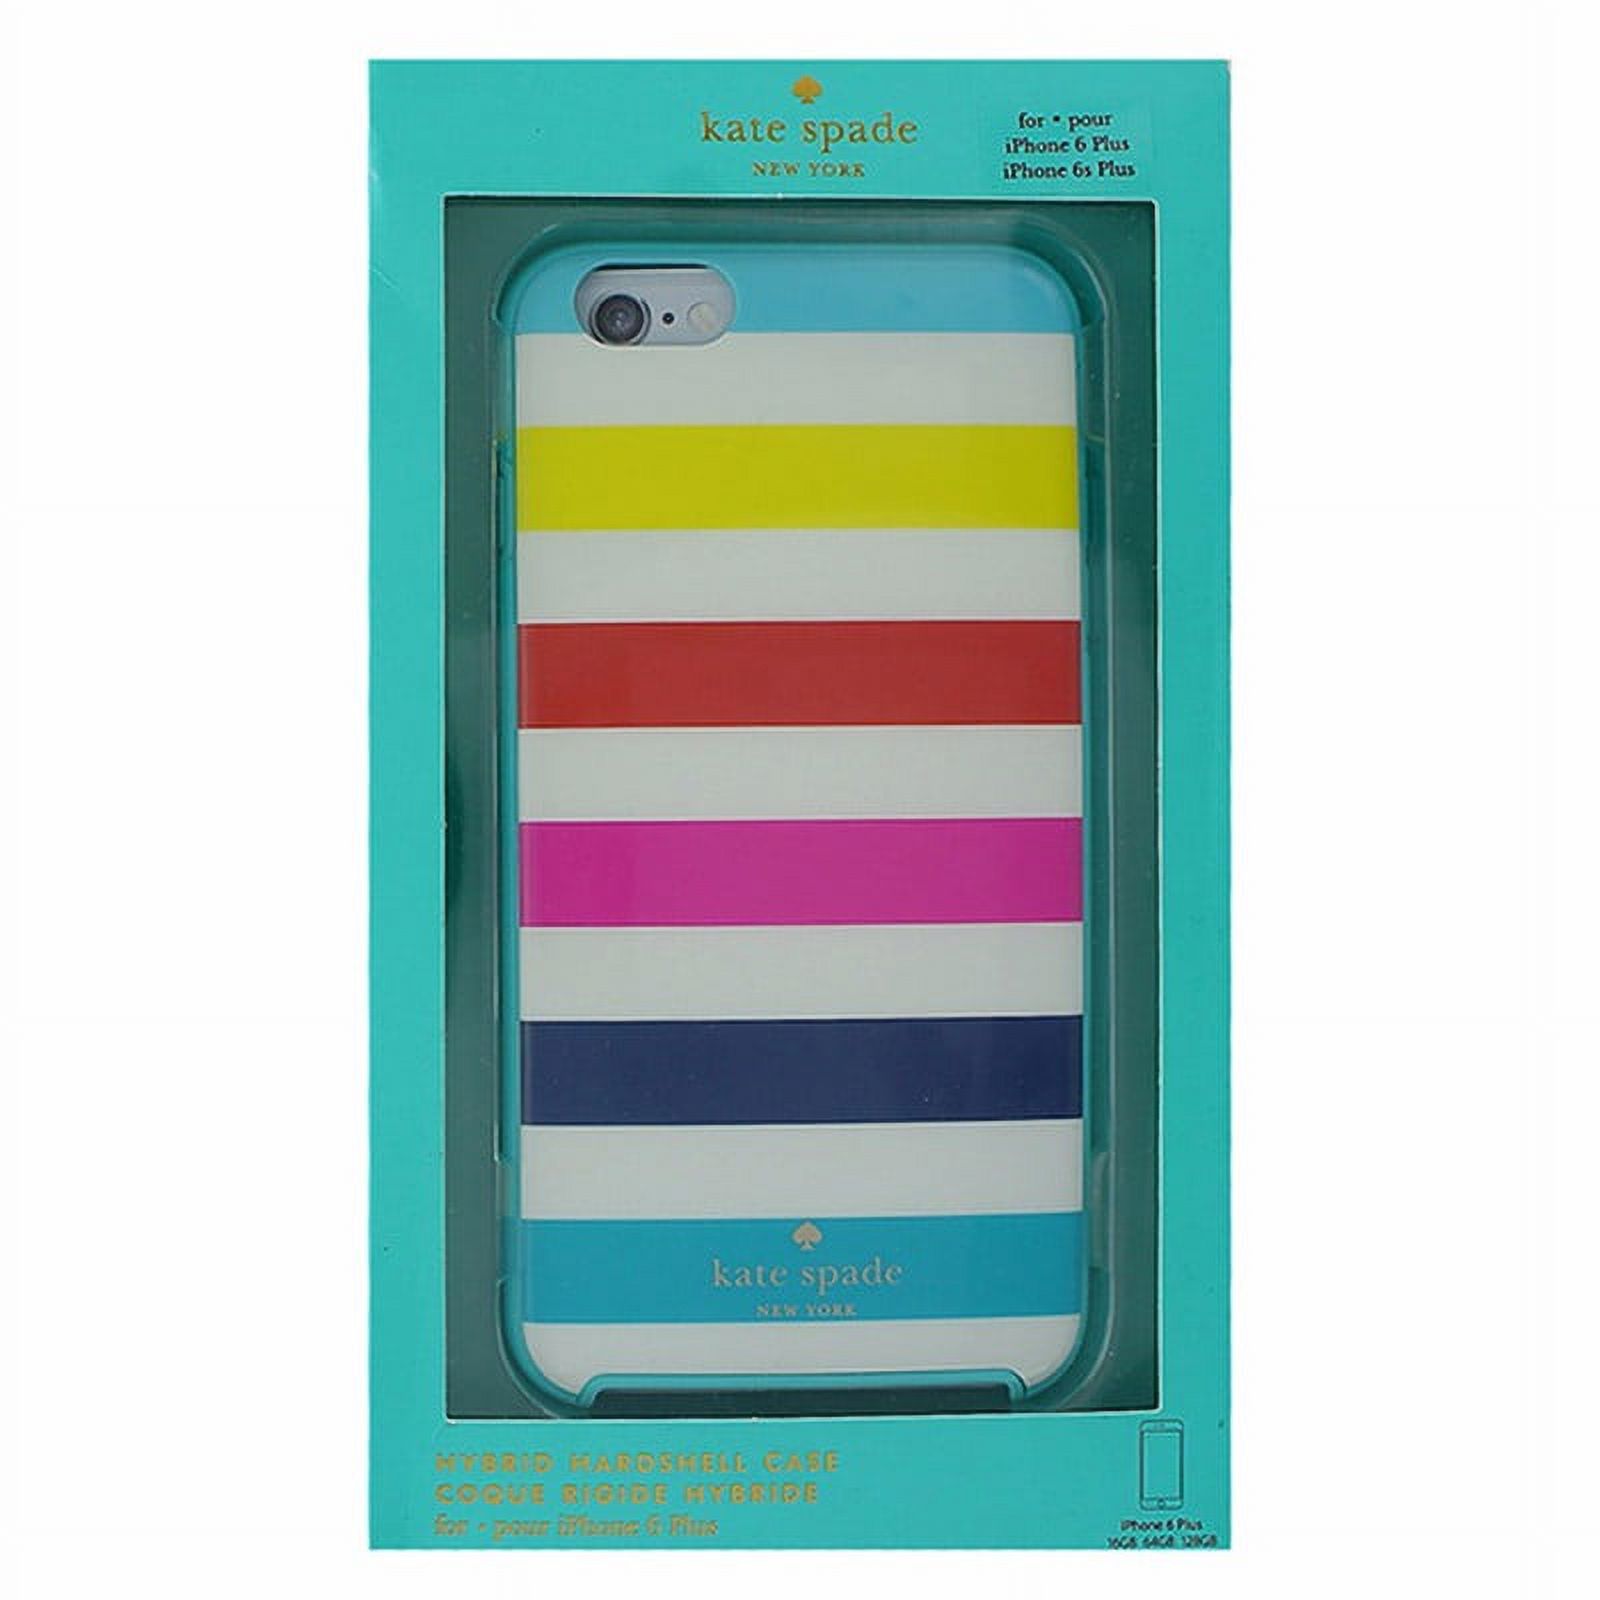 Kate Spade Hybrid Case for iPhone 6 Plus/ 6s Plus - Candy Stripes / Light Blue - image 3 of 3